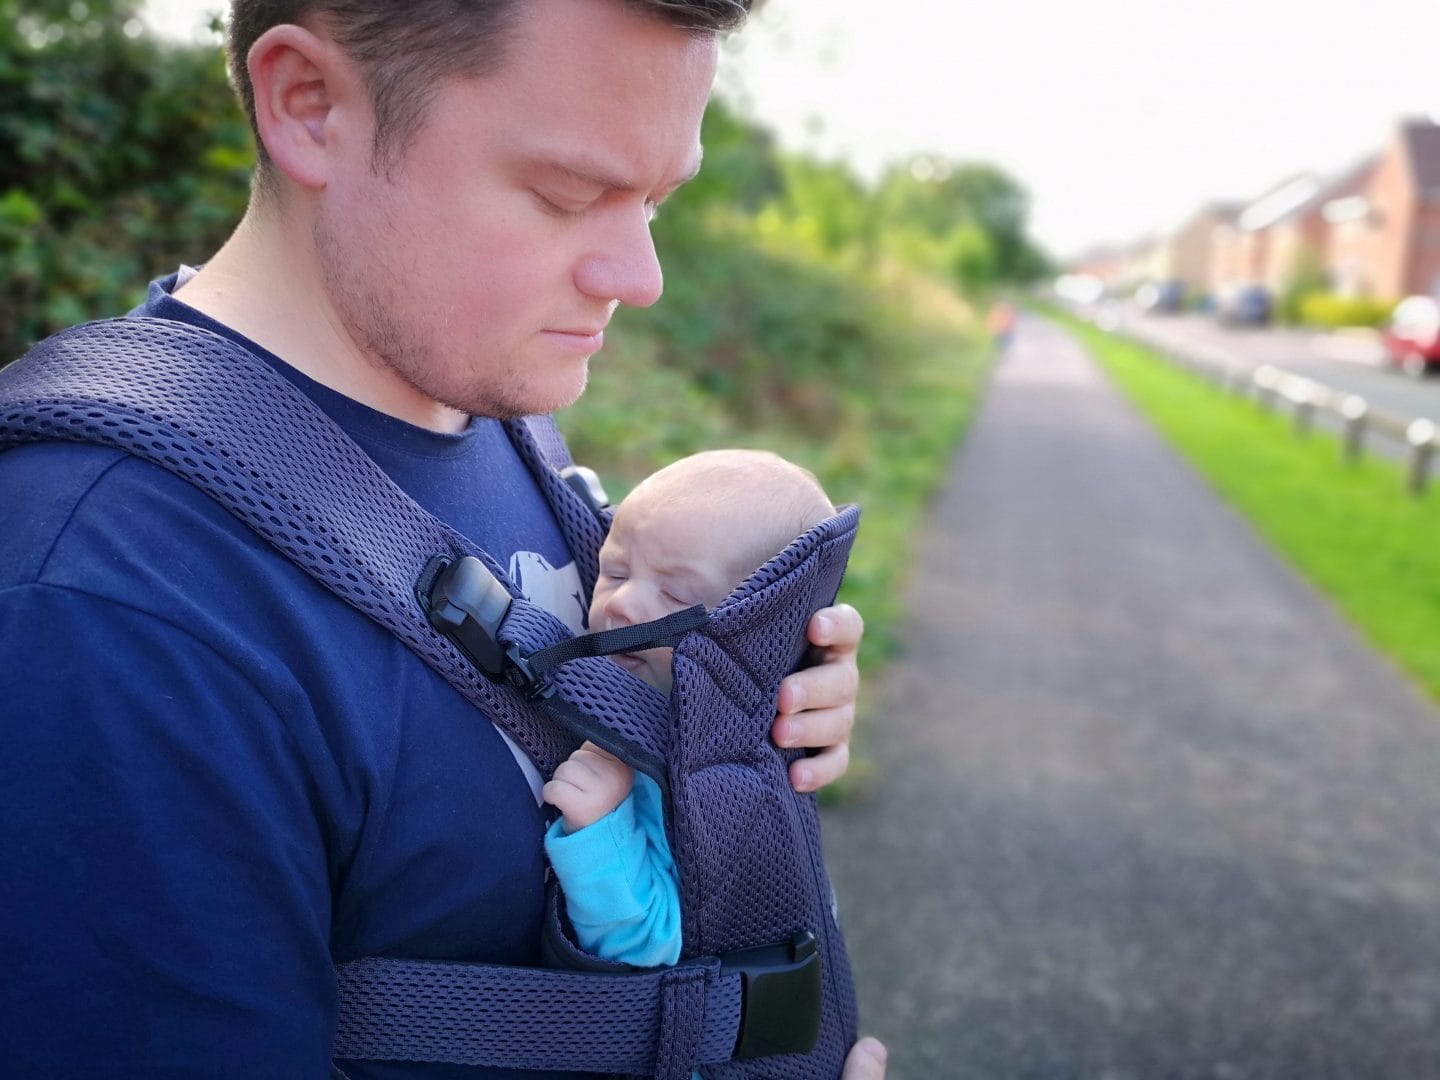 BabyBjorn Baby Carrier One Air